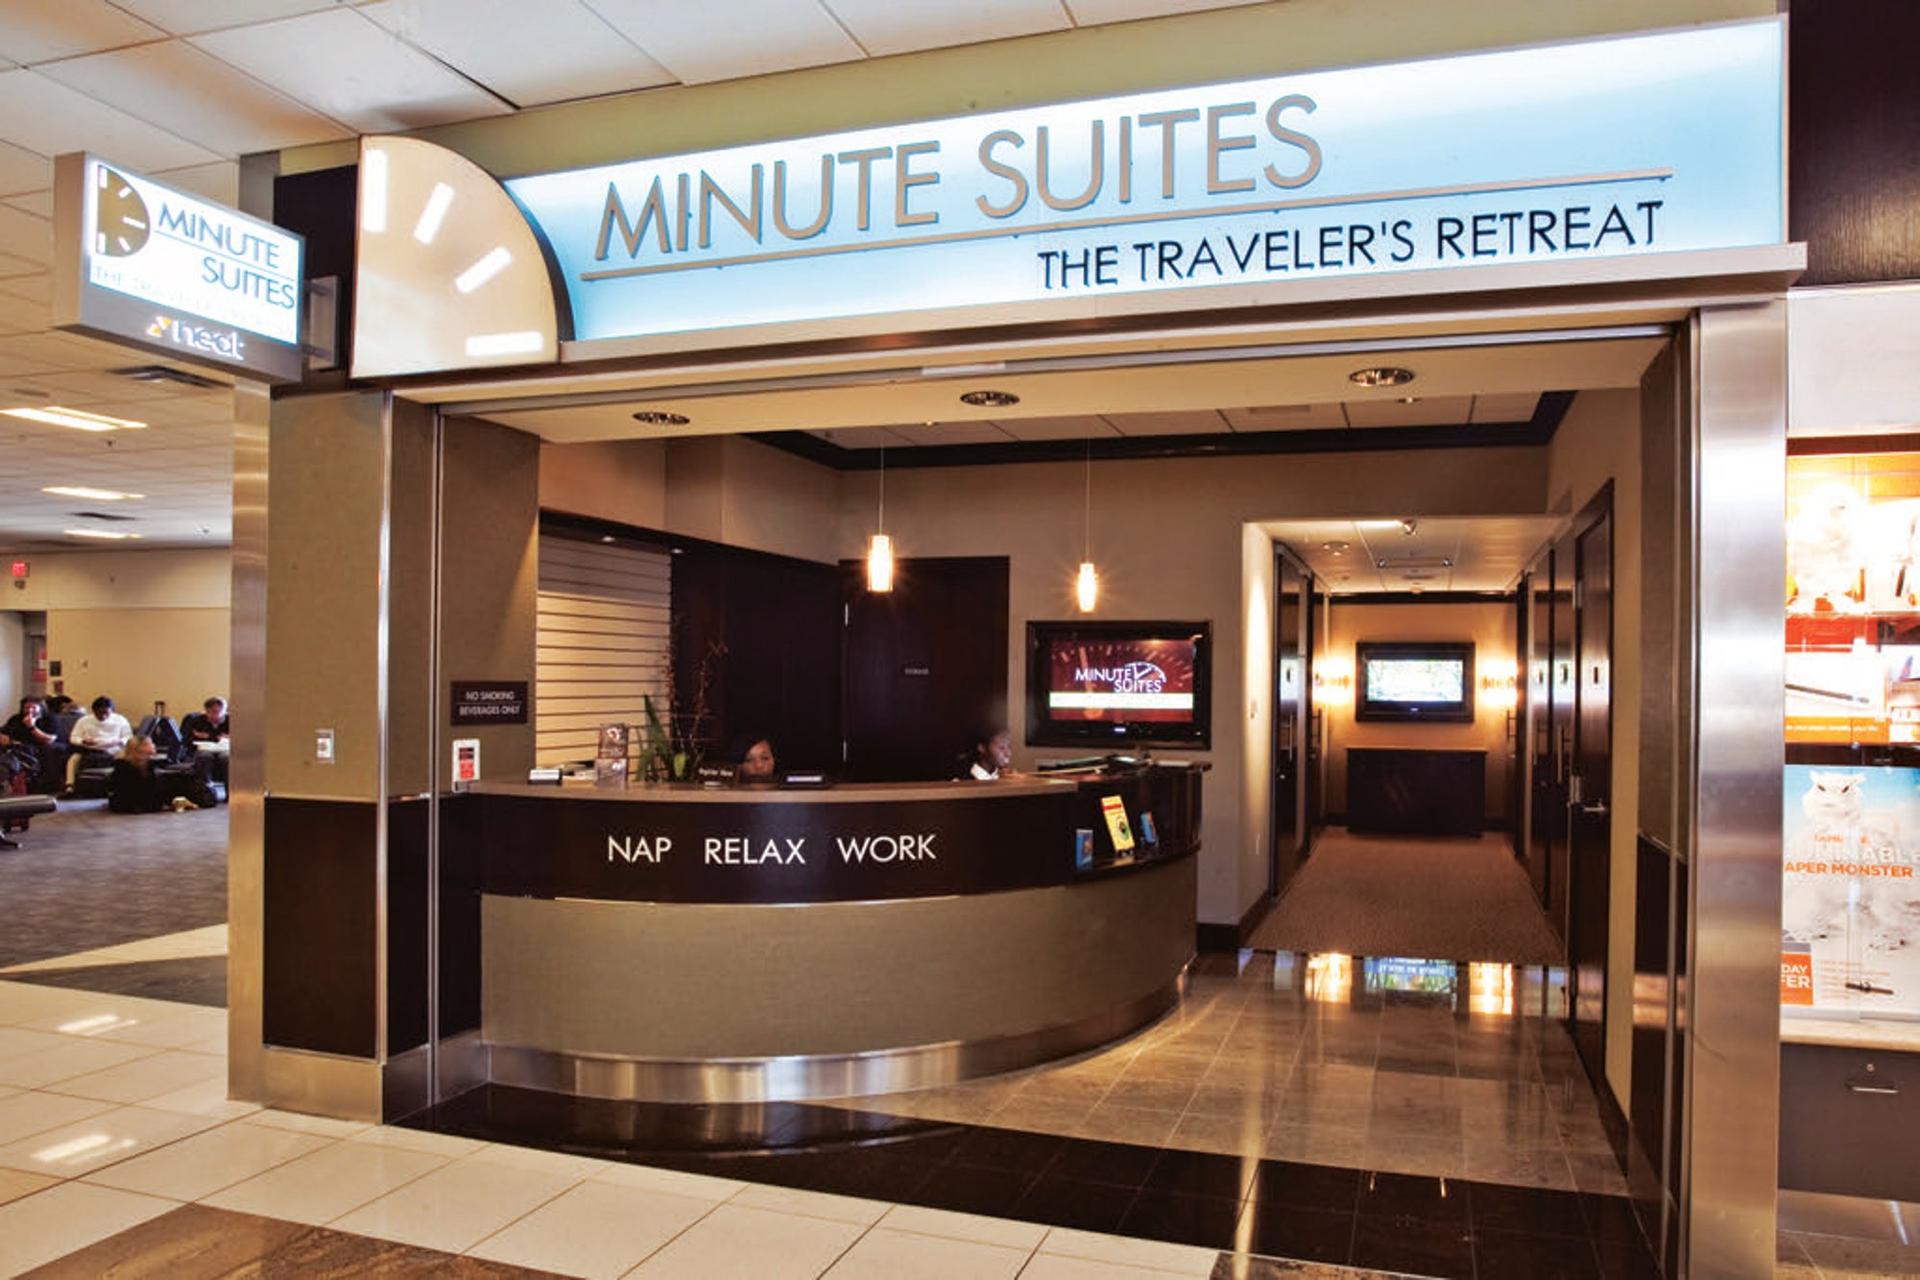 Minute Suites (Gate B15) image 11 of 19